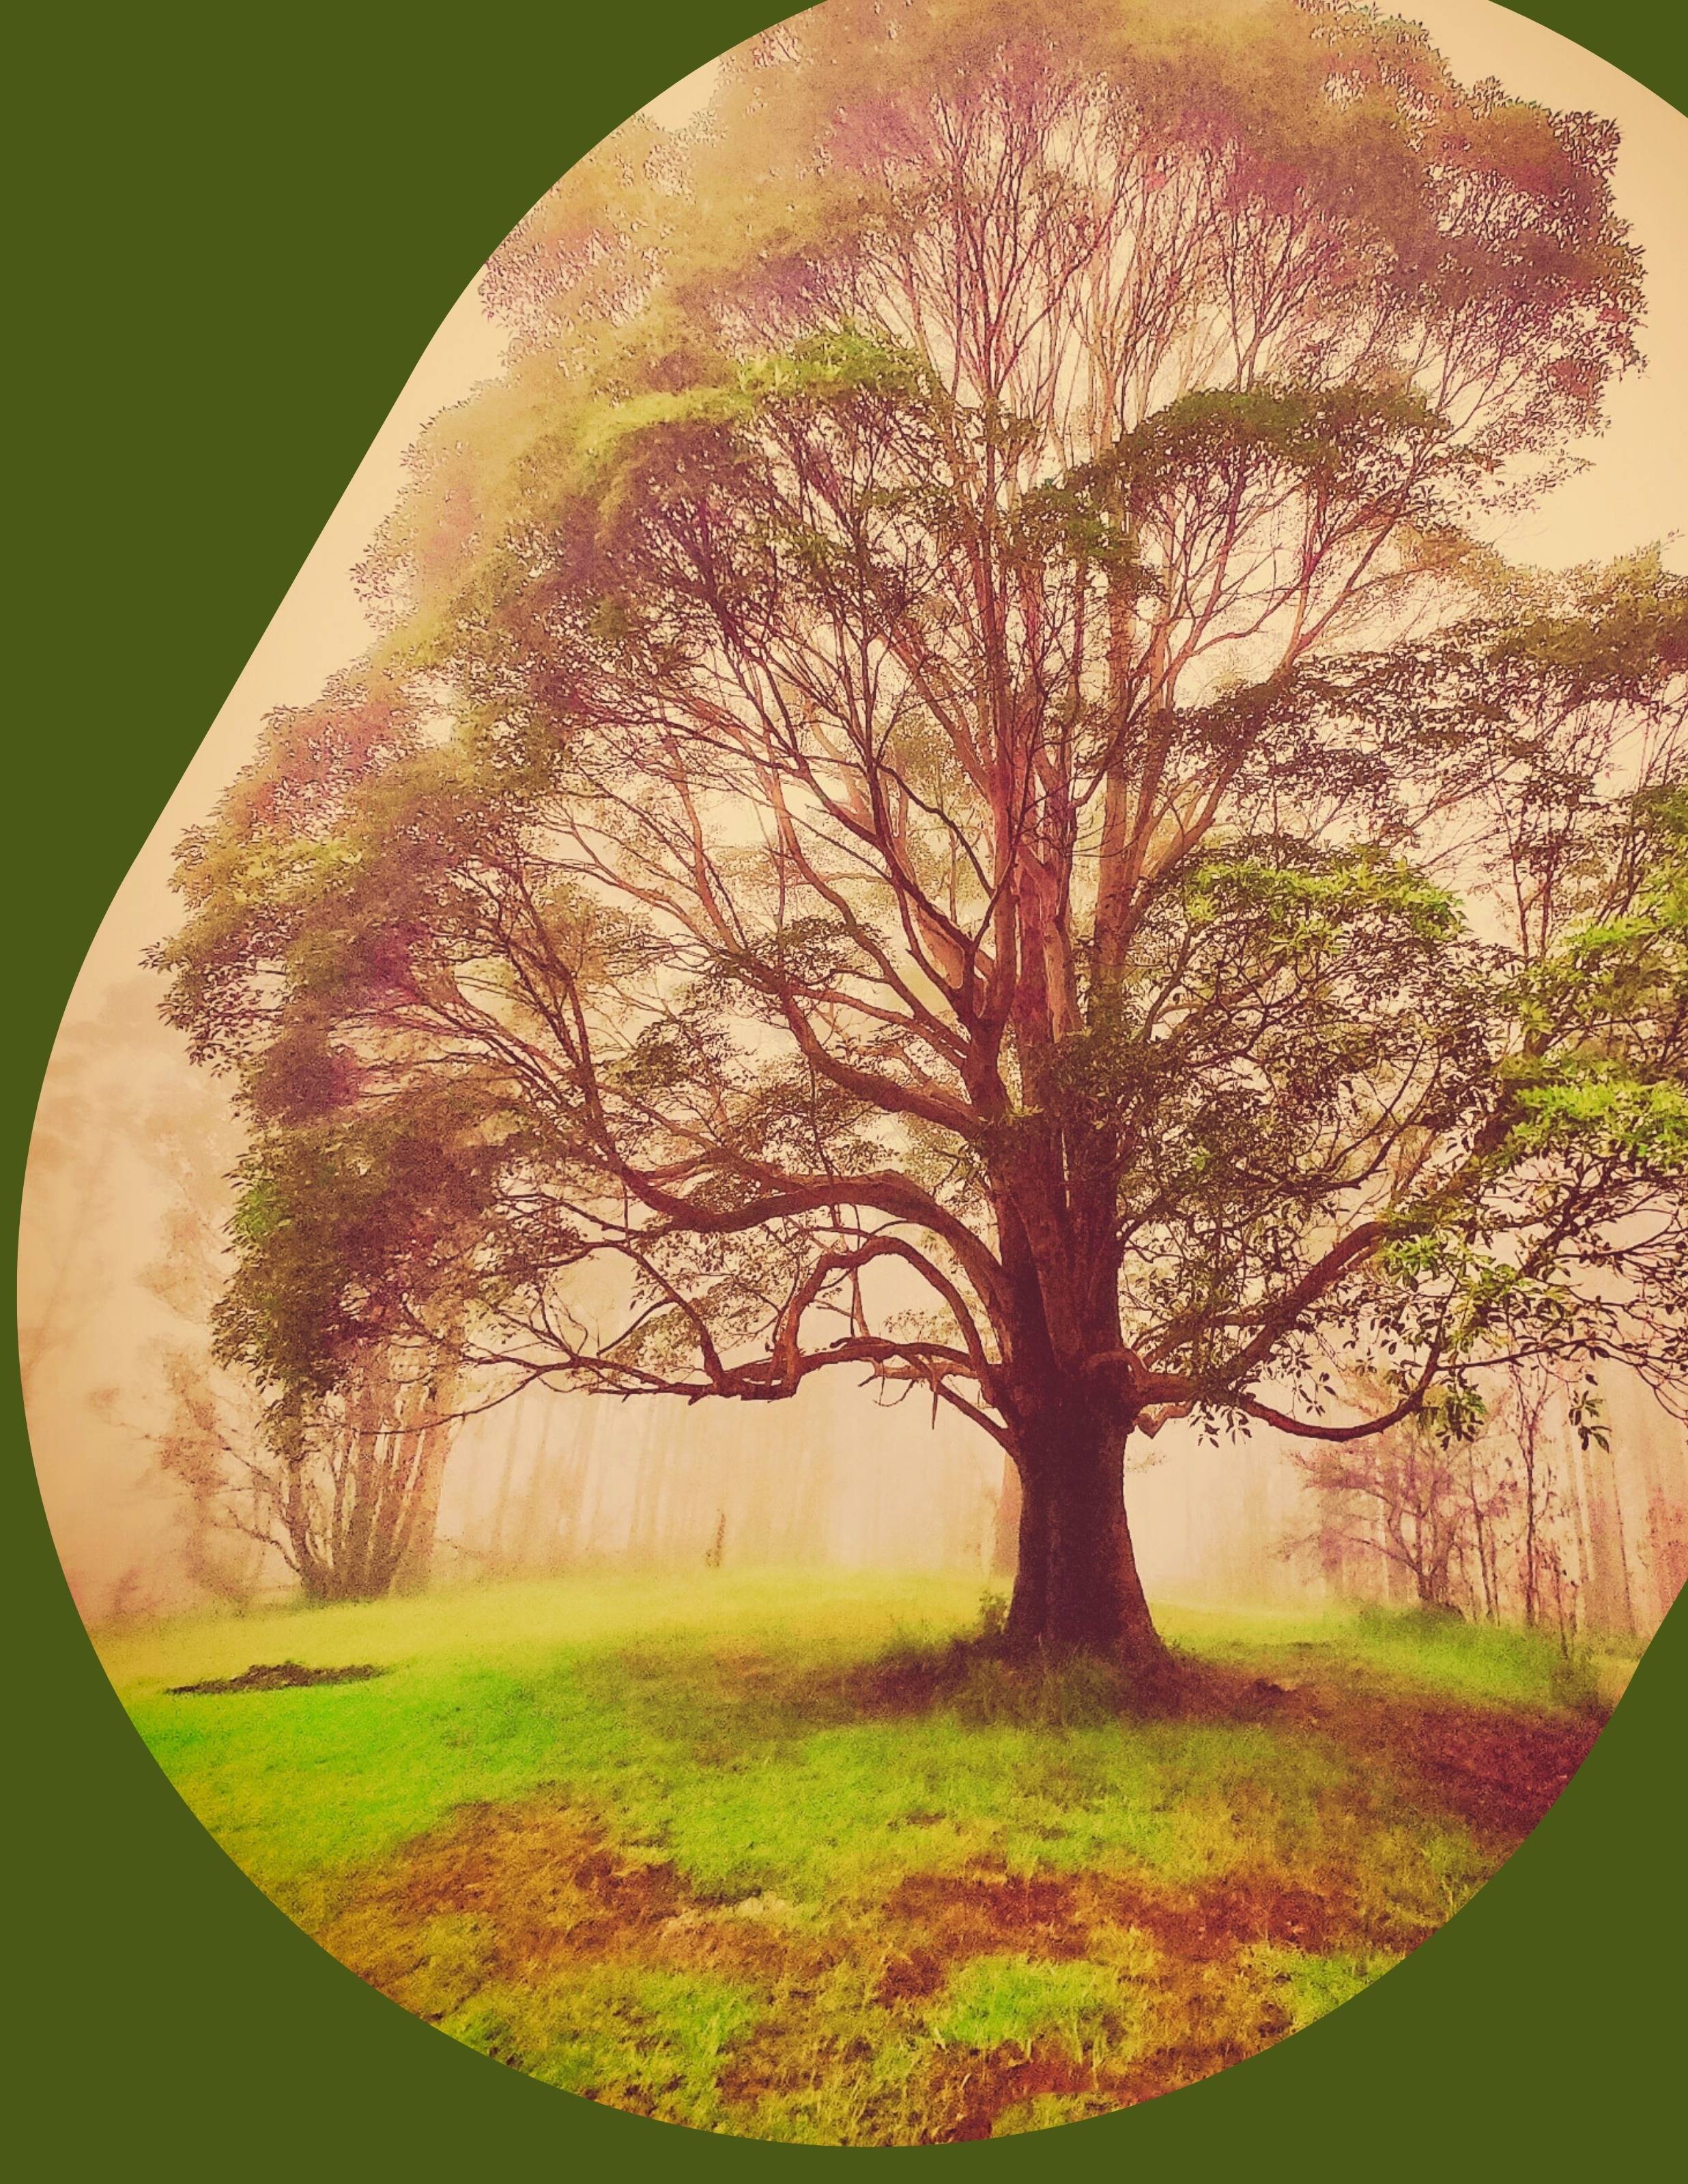 Large Tree in an open field with foliage dramatically veiled in mist or fog